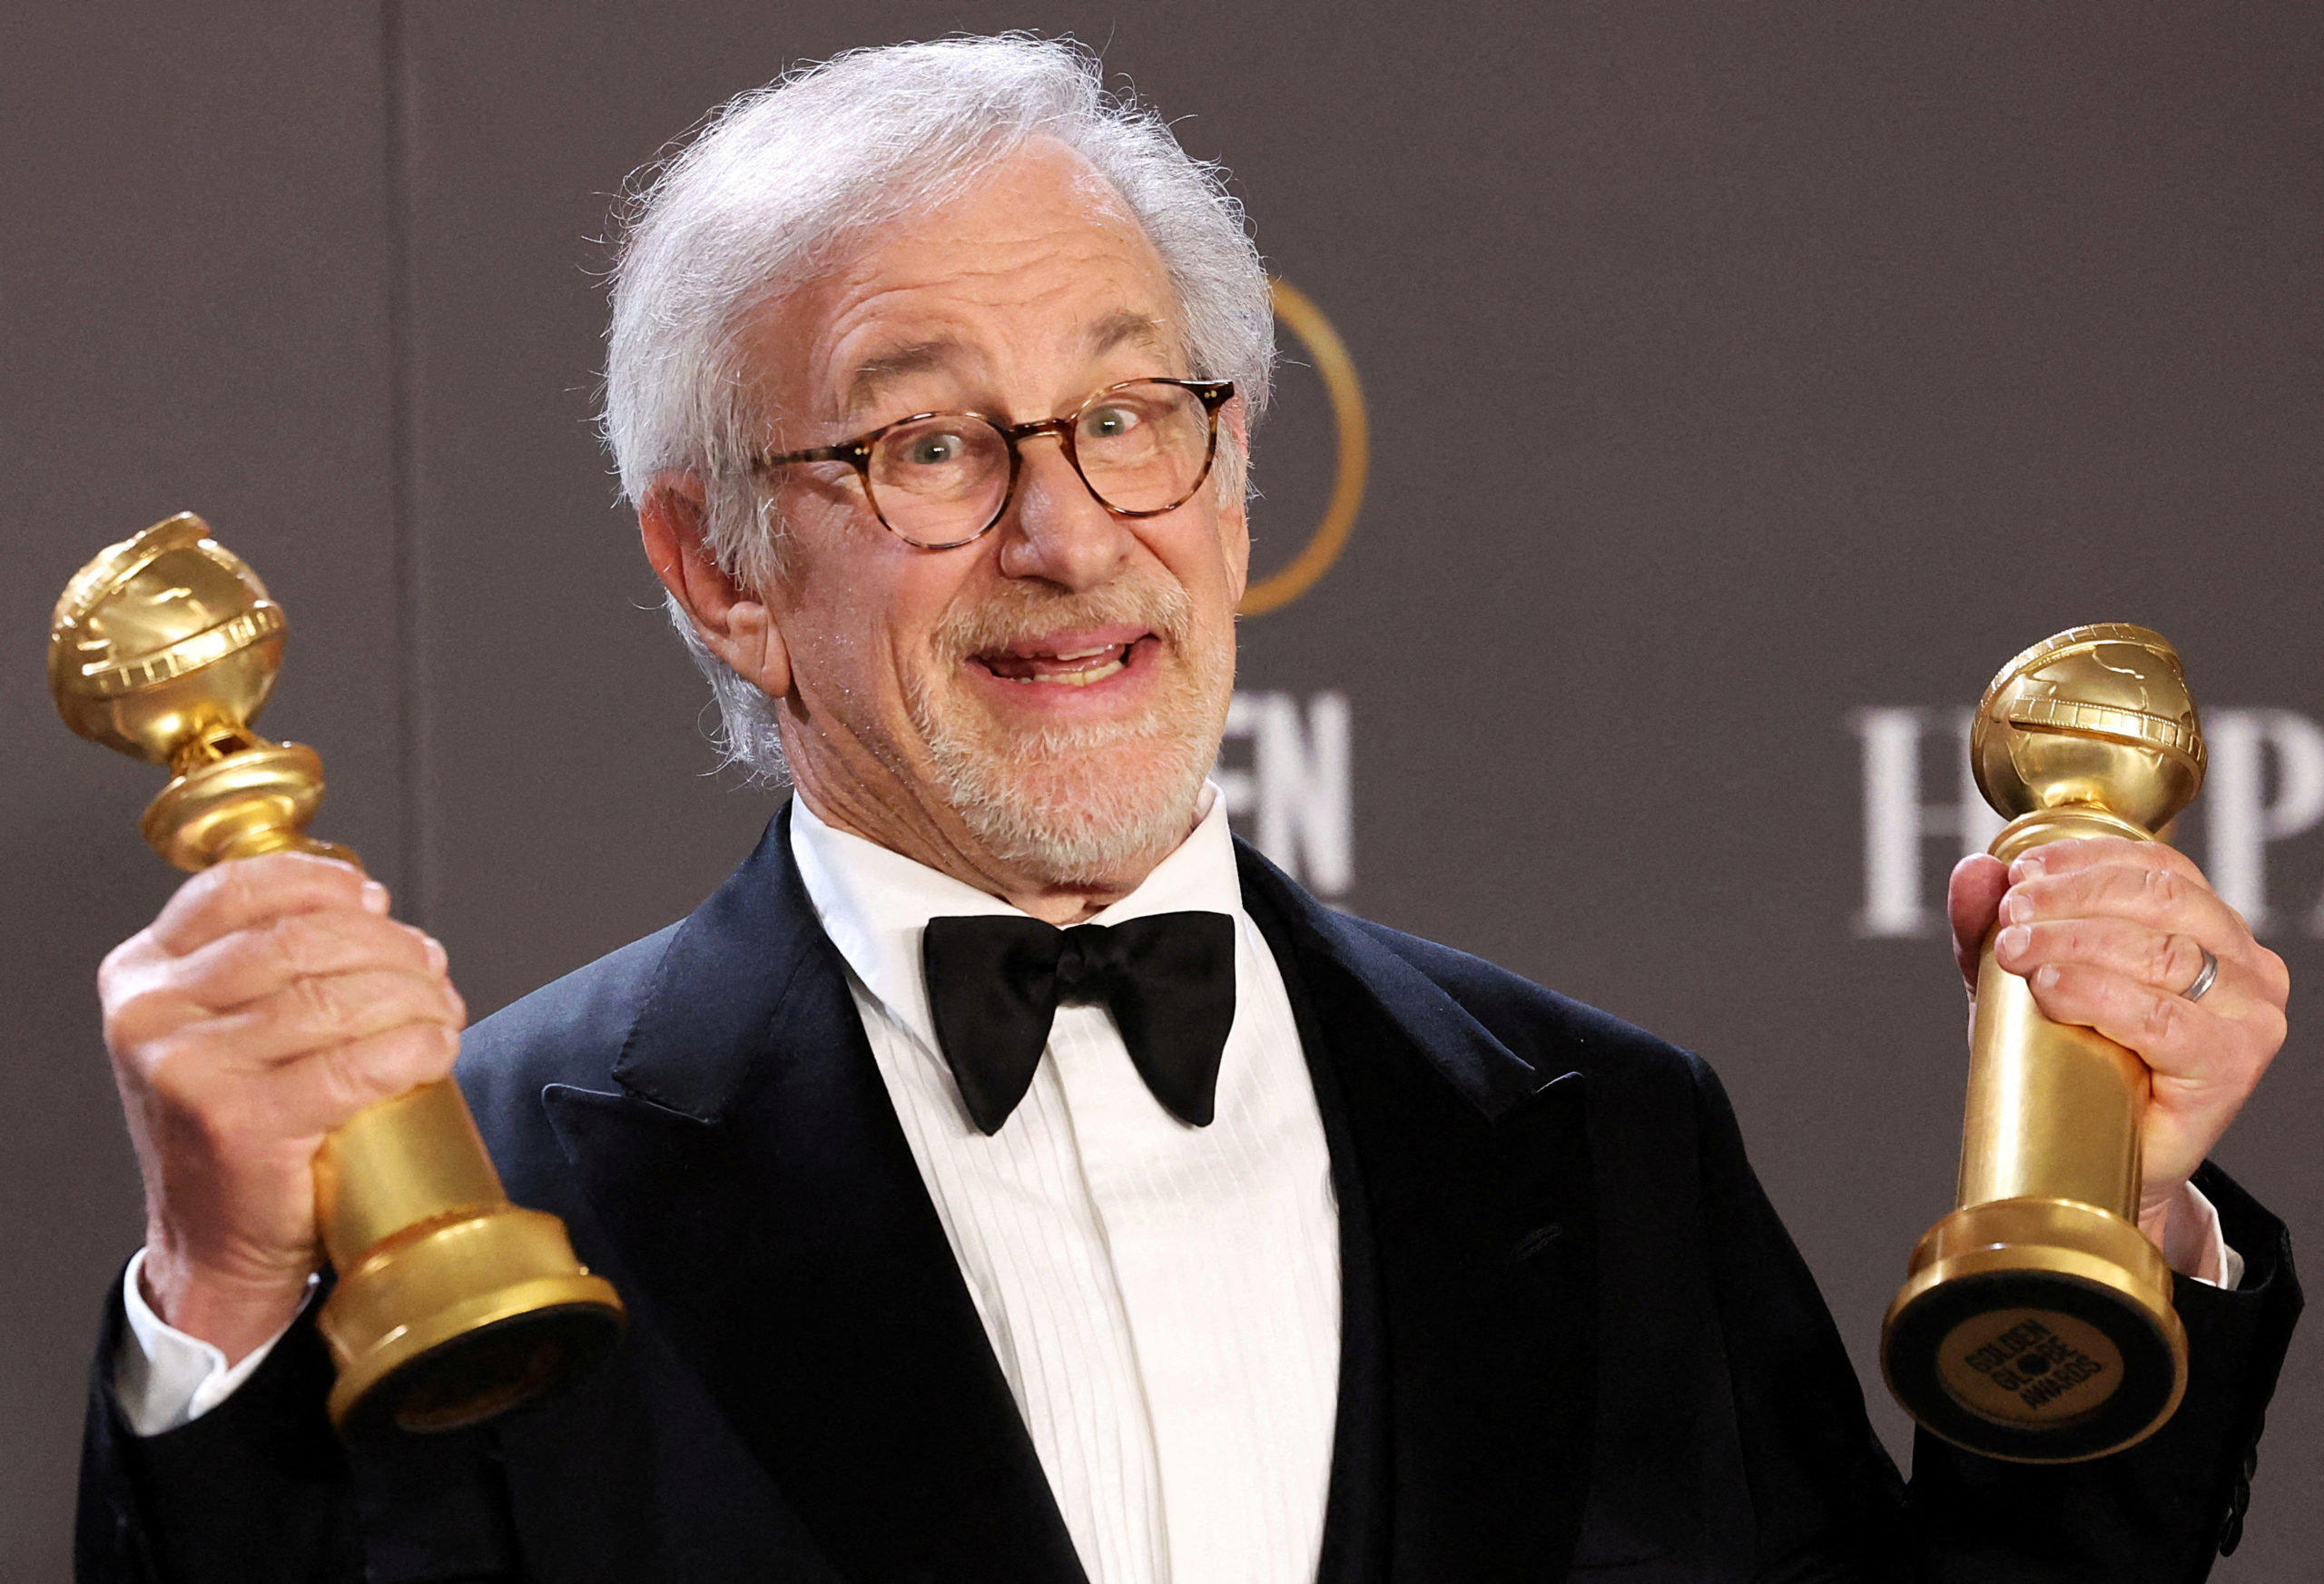 Steven Spielberg poses with his awards for Best Director in a Motion Picture and Best Picture Drama for "The Fabelmans" at the 80th Annual Golden Globe Awards in Beverly Hills, California, U.S., January 10, 2023. REUTERS/Mario Anzuoni